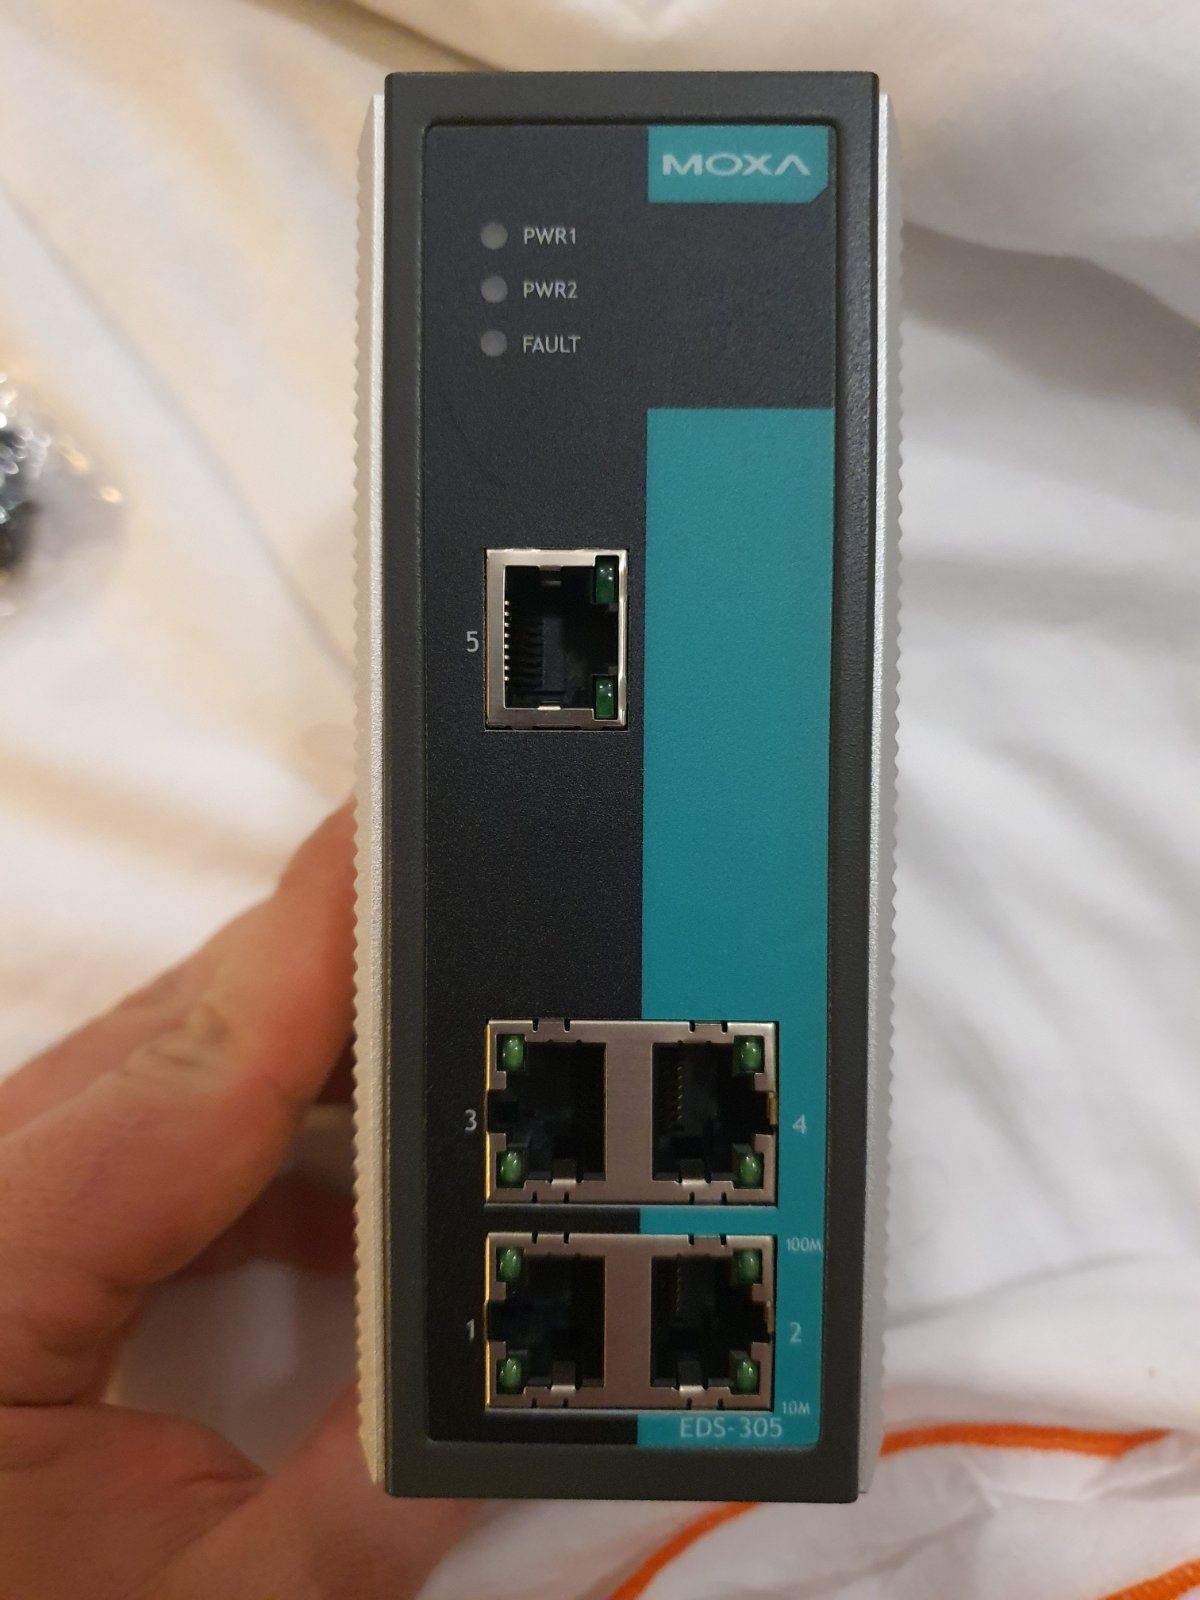 The EDS-305 Ethernet switche